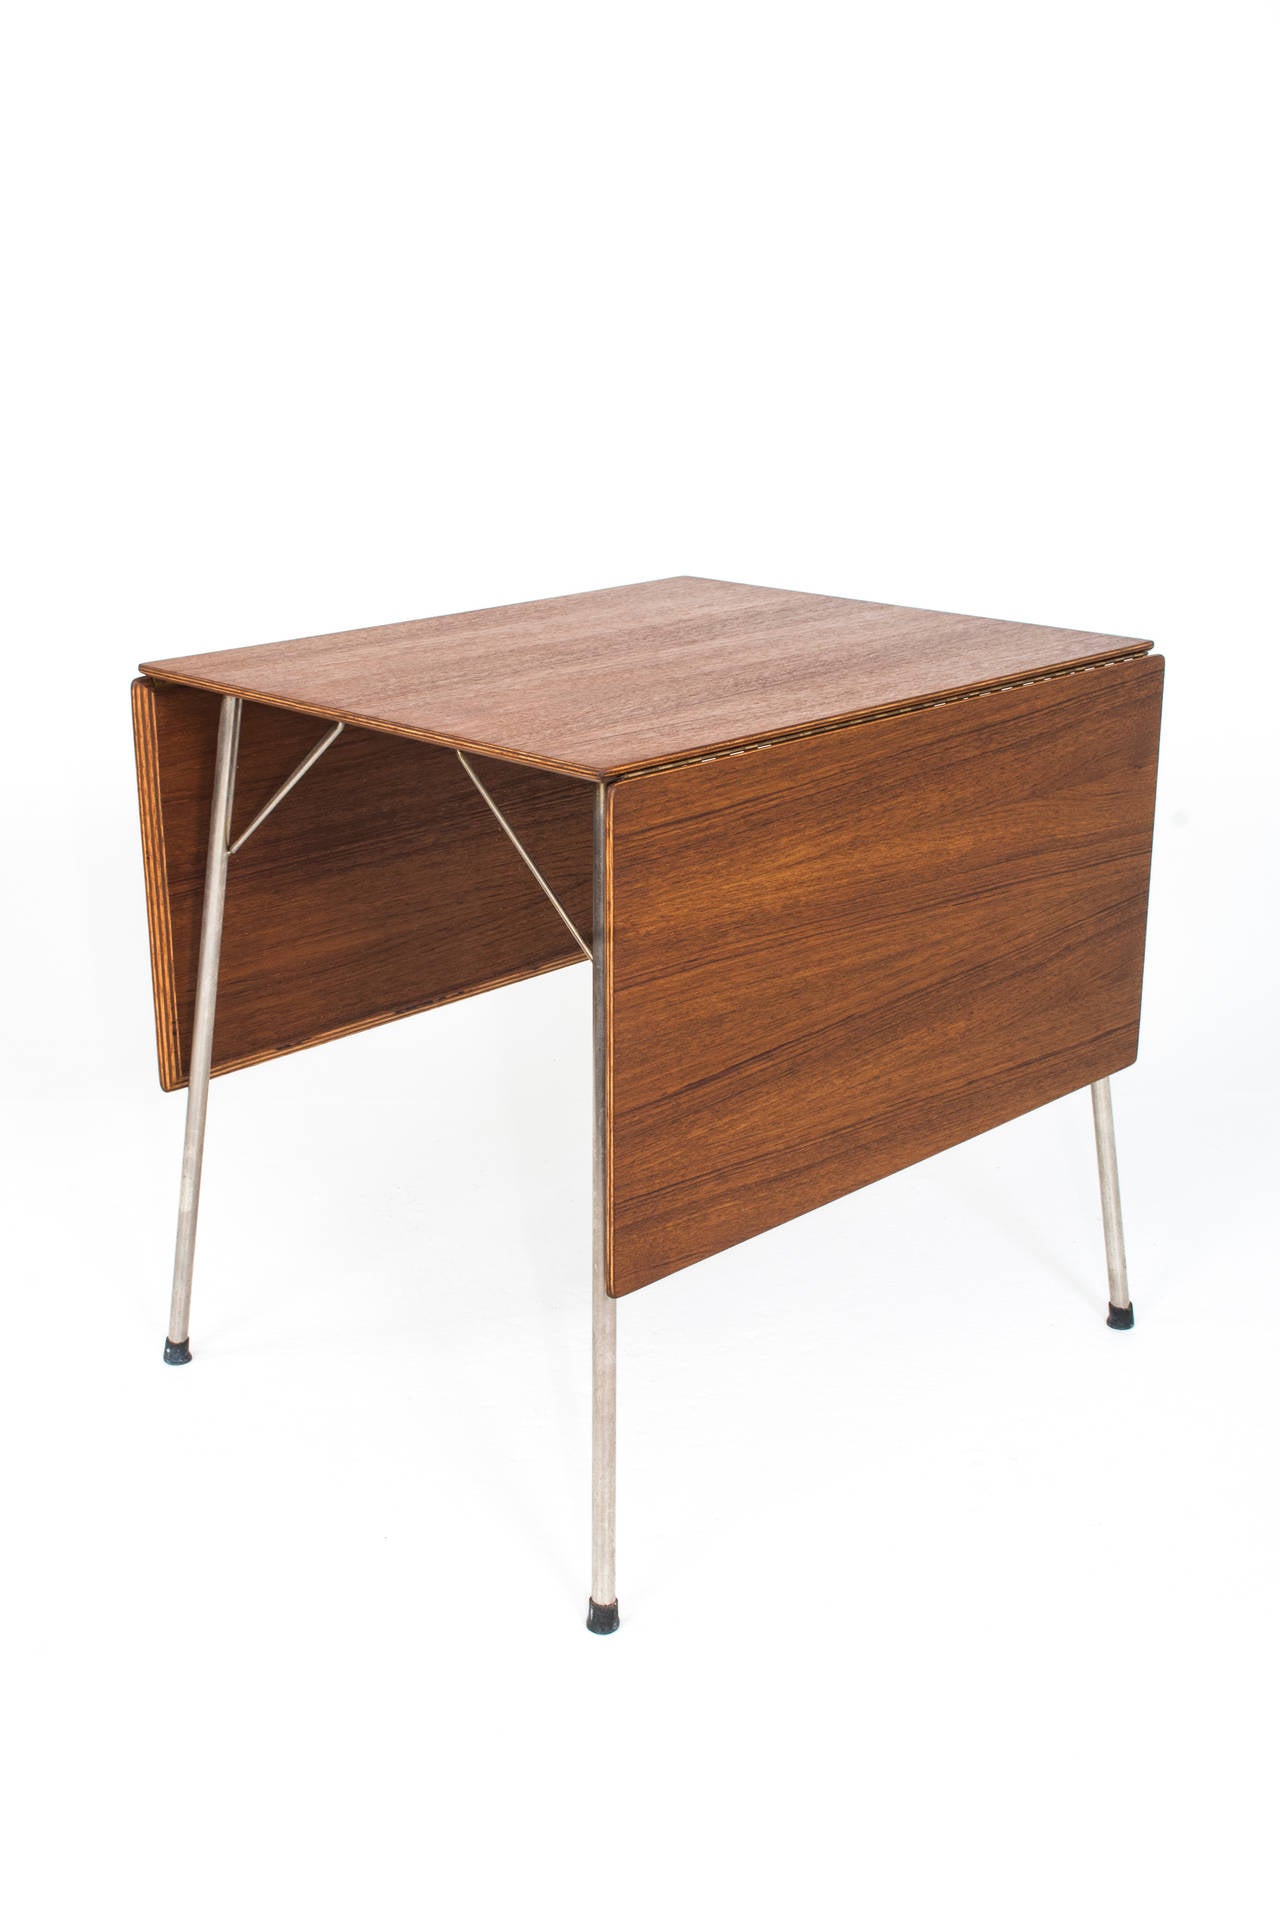 Arne Jacobsen. Table with leaves, model 3601. Teak top, chrome-plated steel.

Produced in 1953 by Fritz Hansen.

Folded out 140 cm.

Beautiful refinished condition.